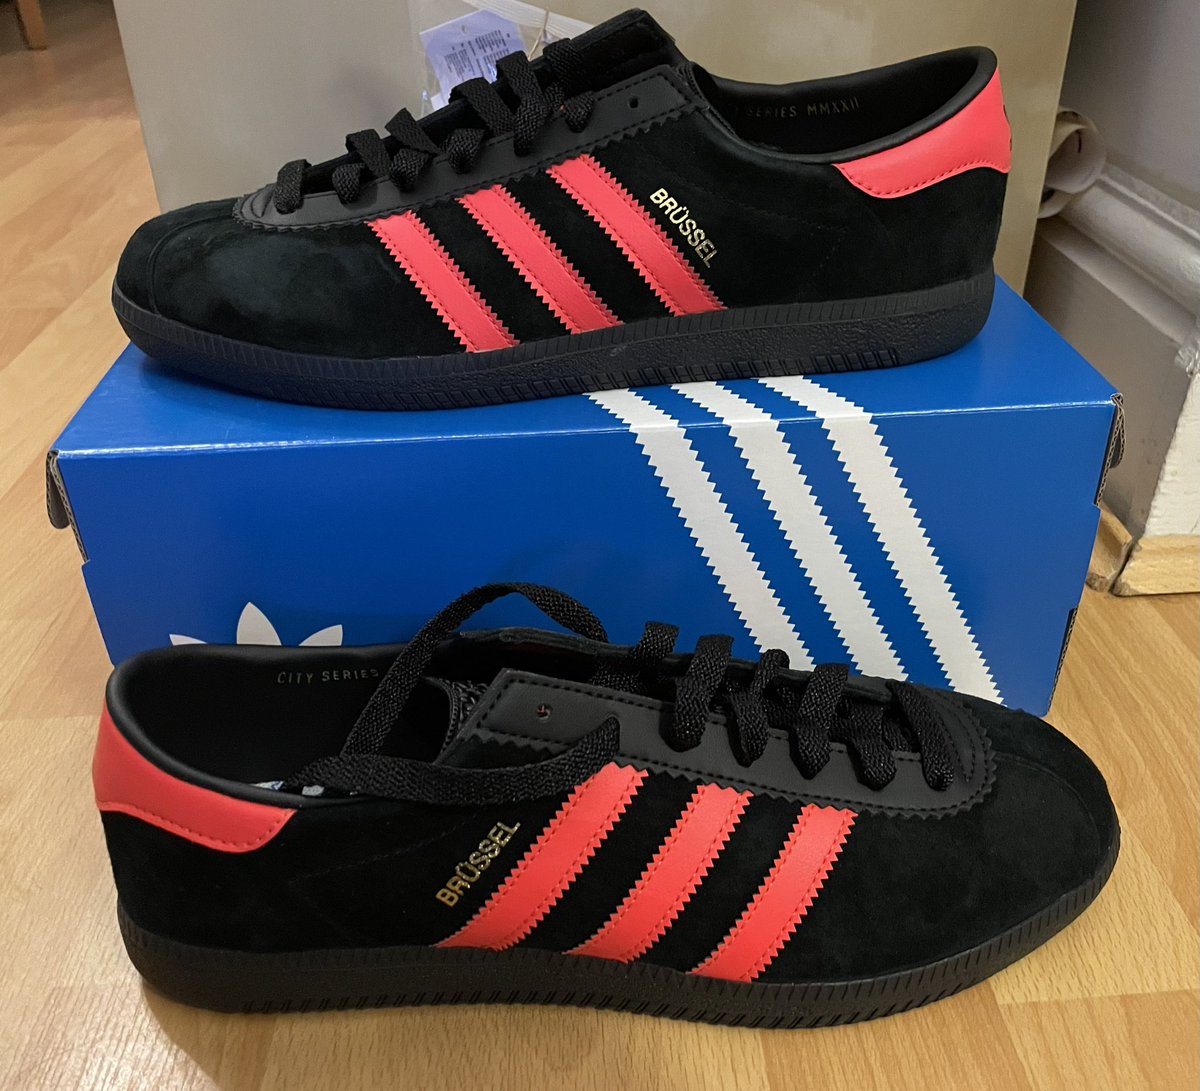 @adiFamily_ 🚨FOR SALE 🚨

adidas Brussel
Size 8 BNIBWT (fit size 8.5)

£85 TYD
Please add 4% if using G&S

Retweets appreciated 👍

#shareyourstripes @TheCasualSniper @Mecloy3stripes @T_C__B_S_T #SPZL @RetroSolesUK @roundarway #adidas #spezial